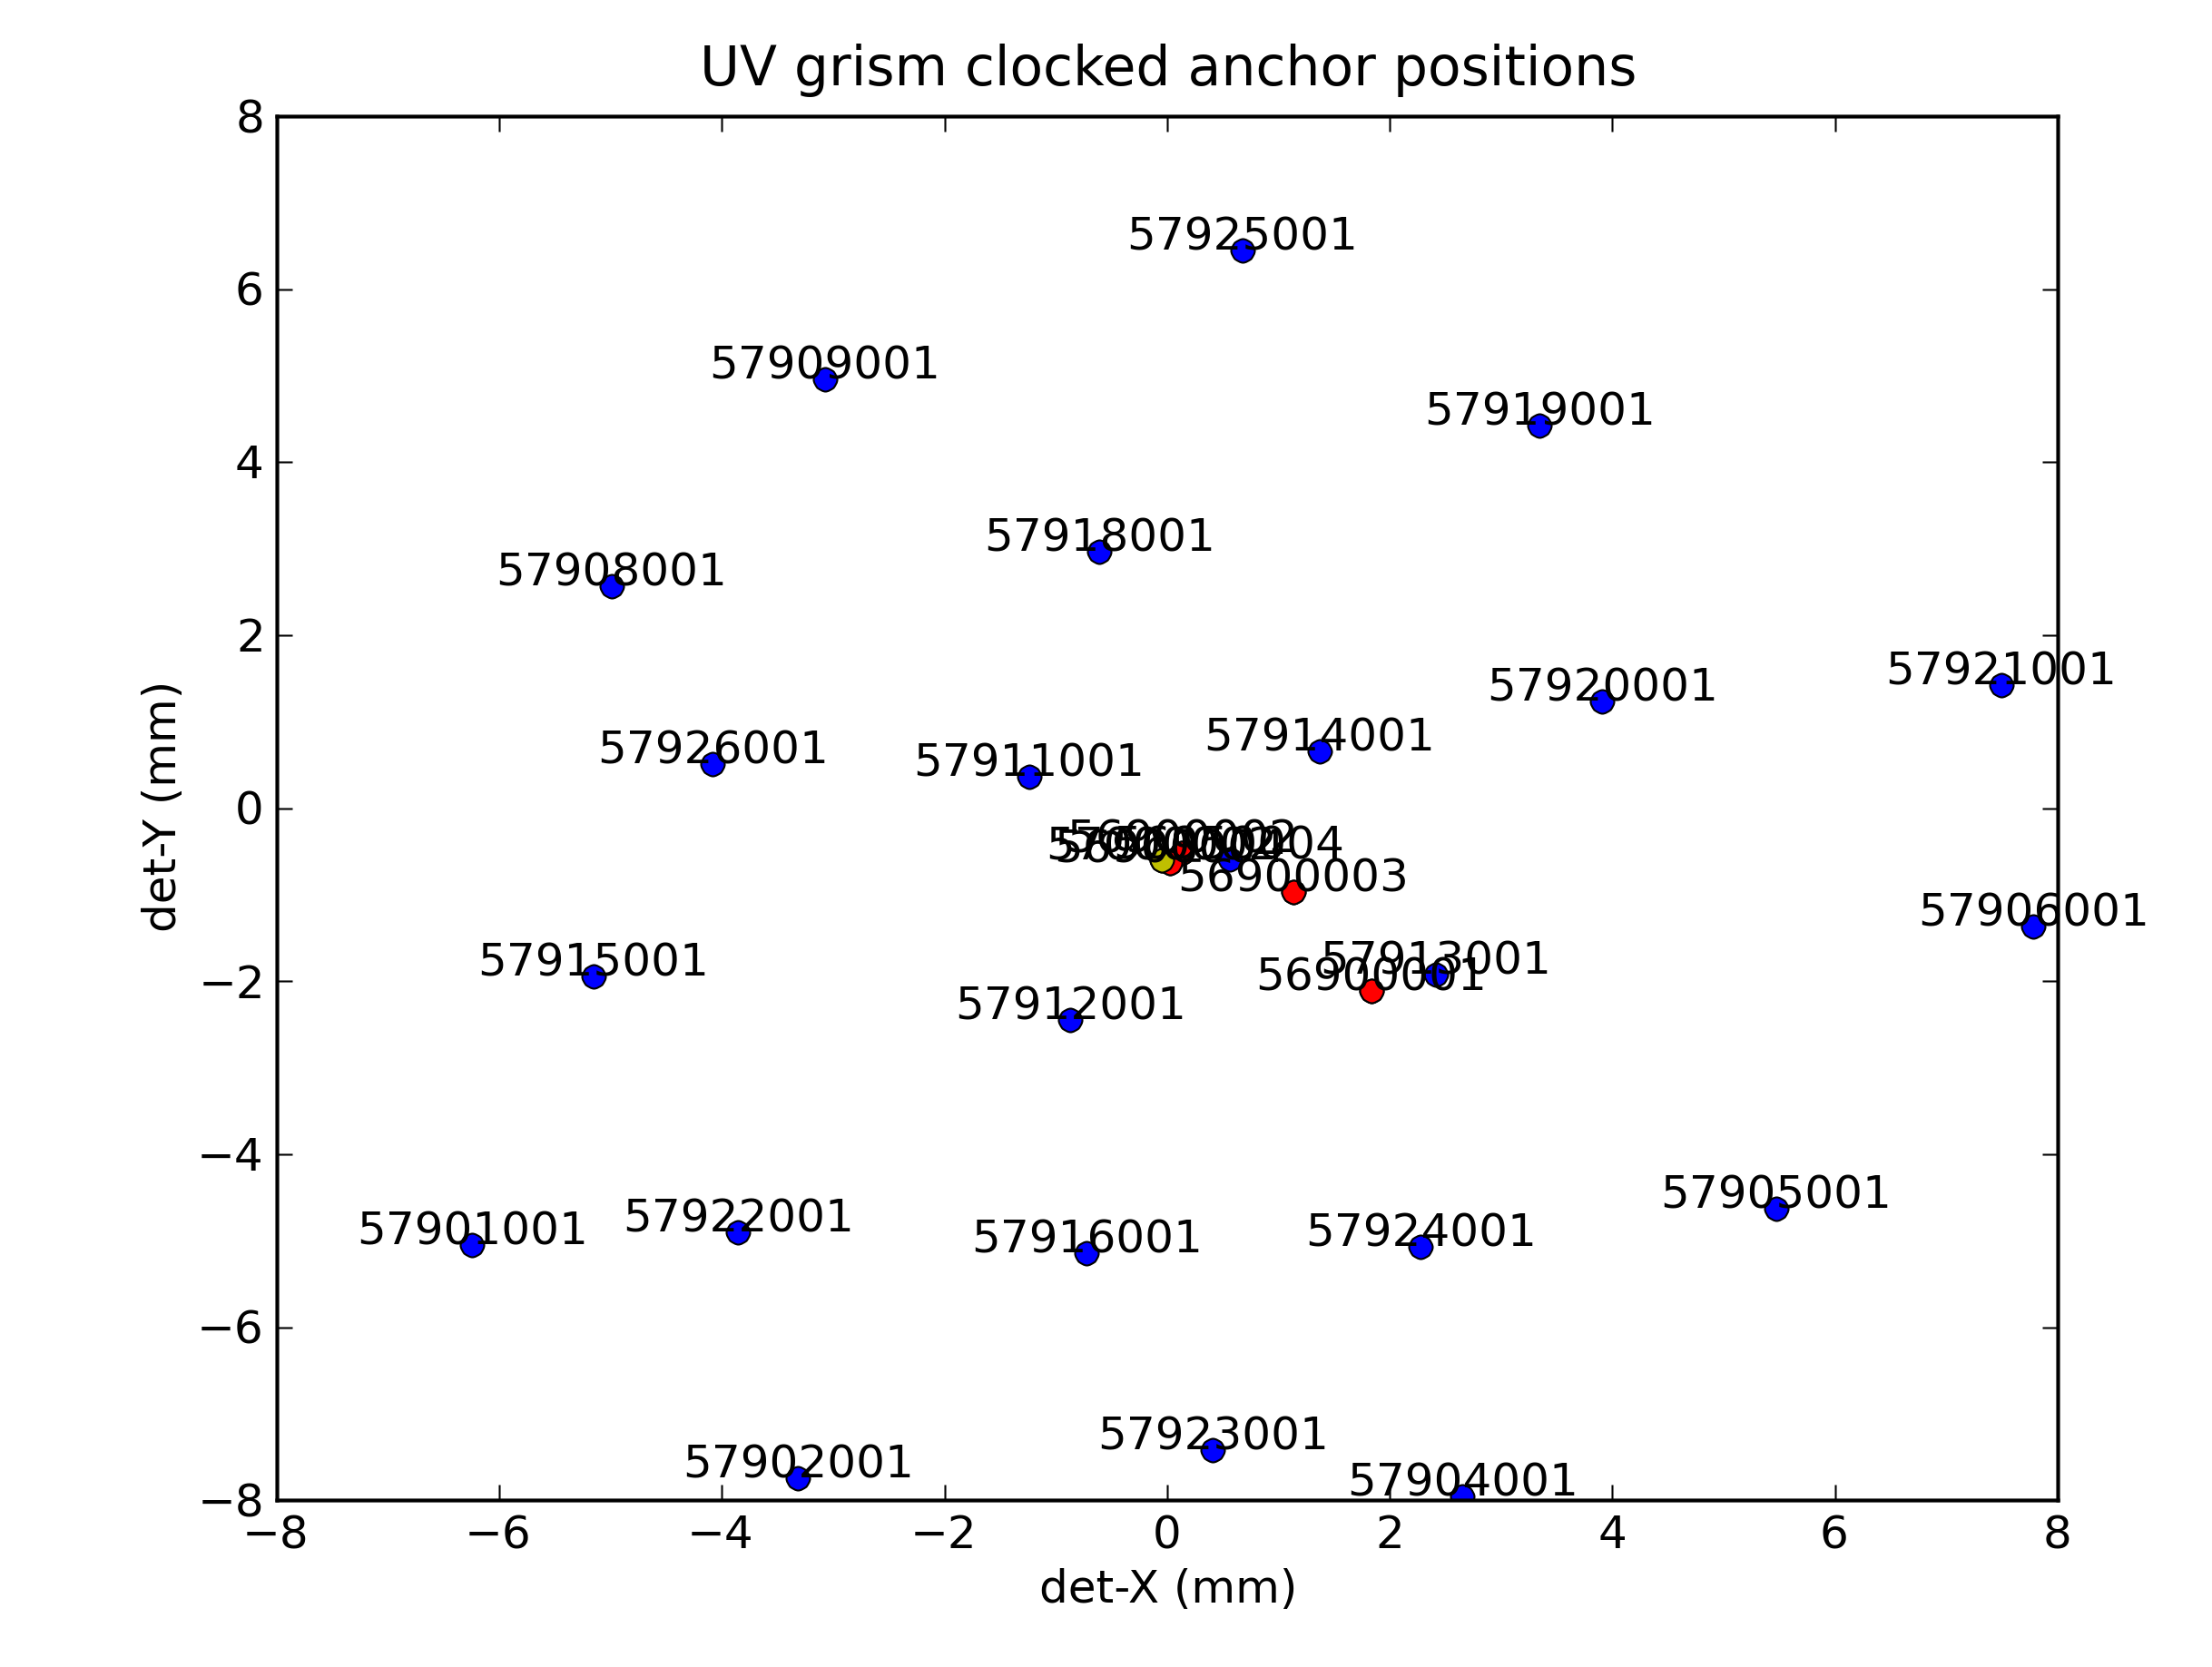 anchor position for clocked UV grism